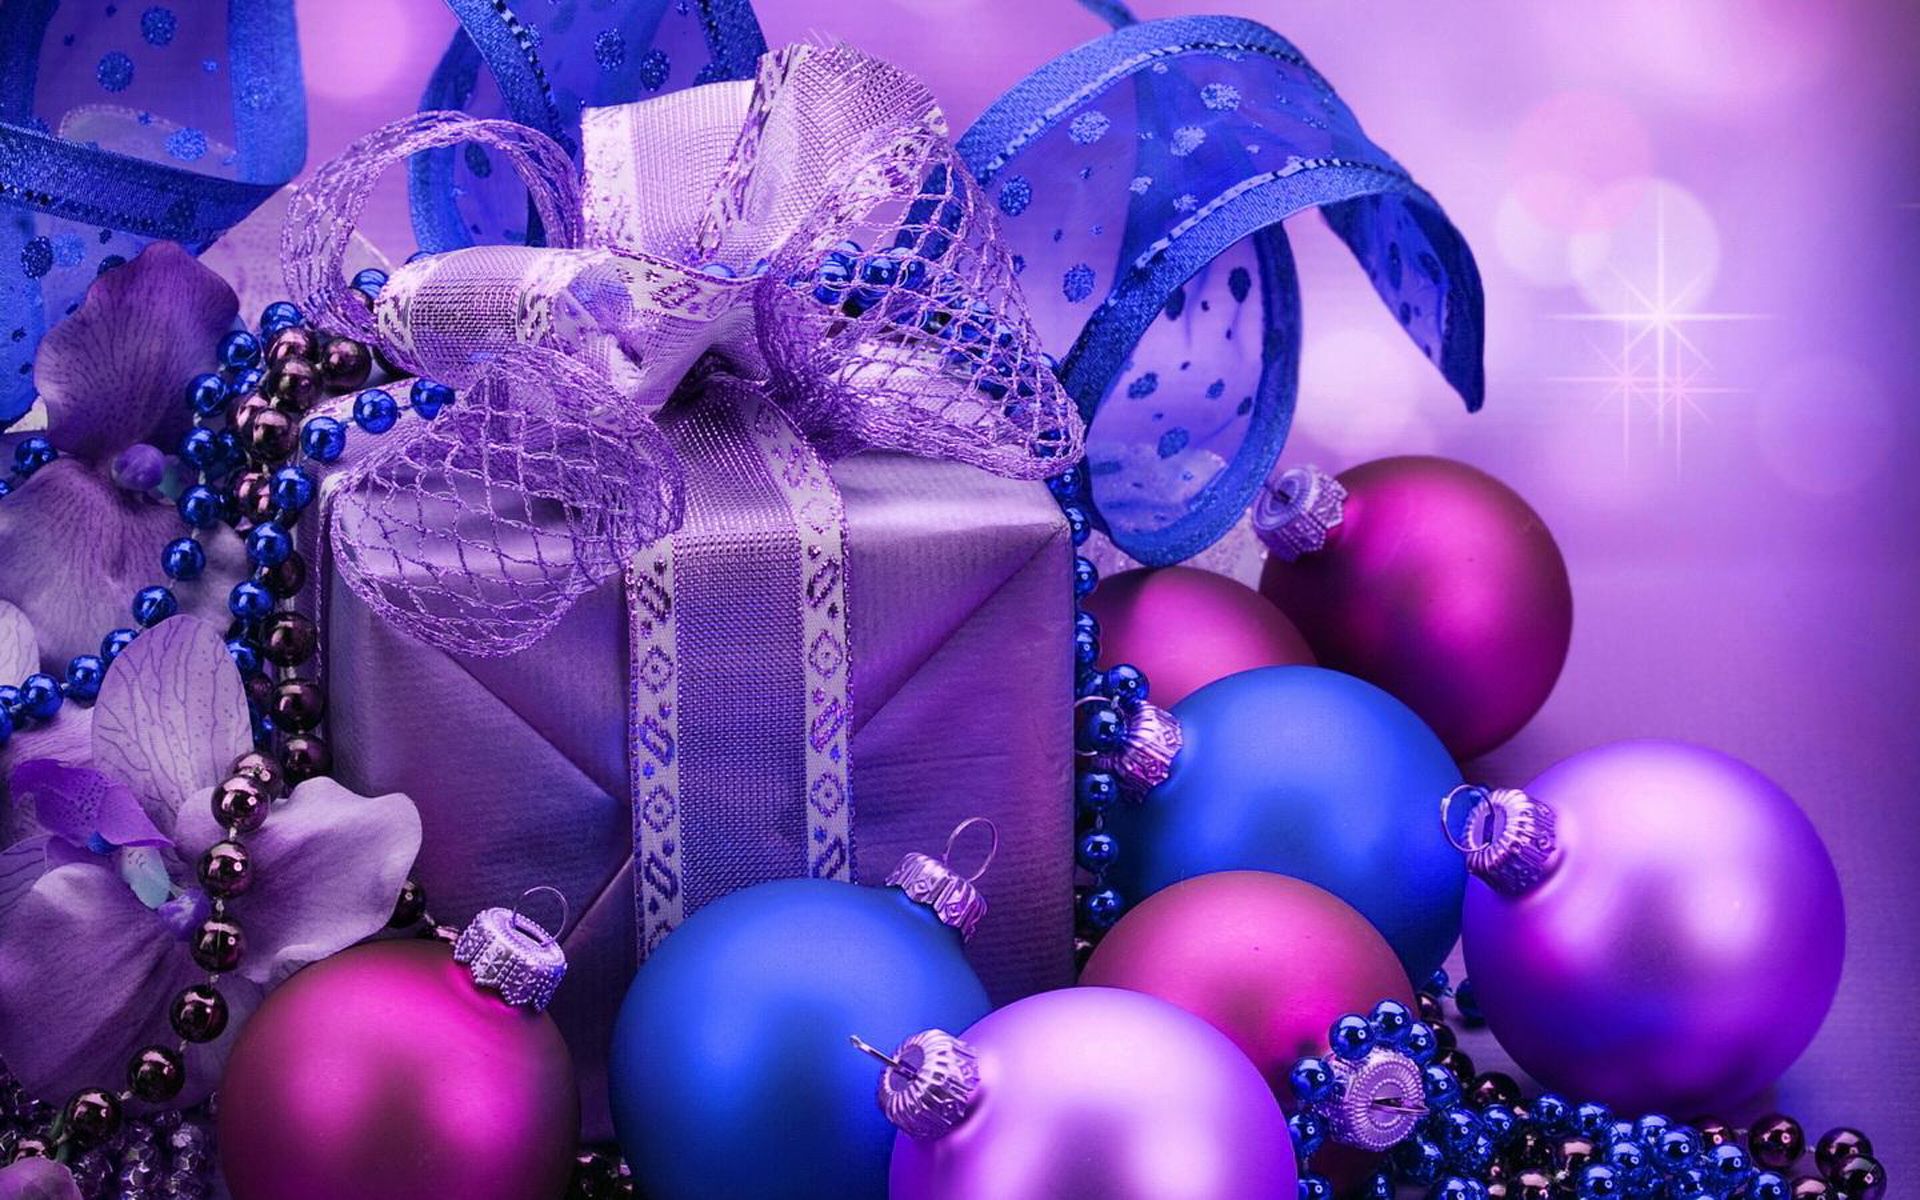 Purple Christmas Gifts Background For Your Deskx1200, Wallpaper13.com